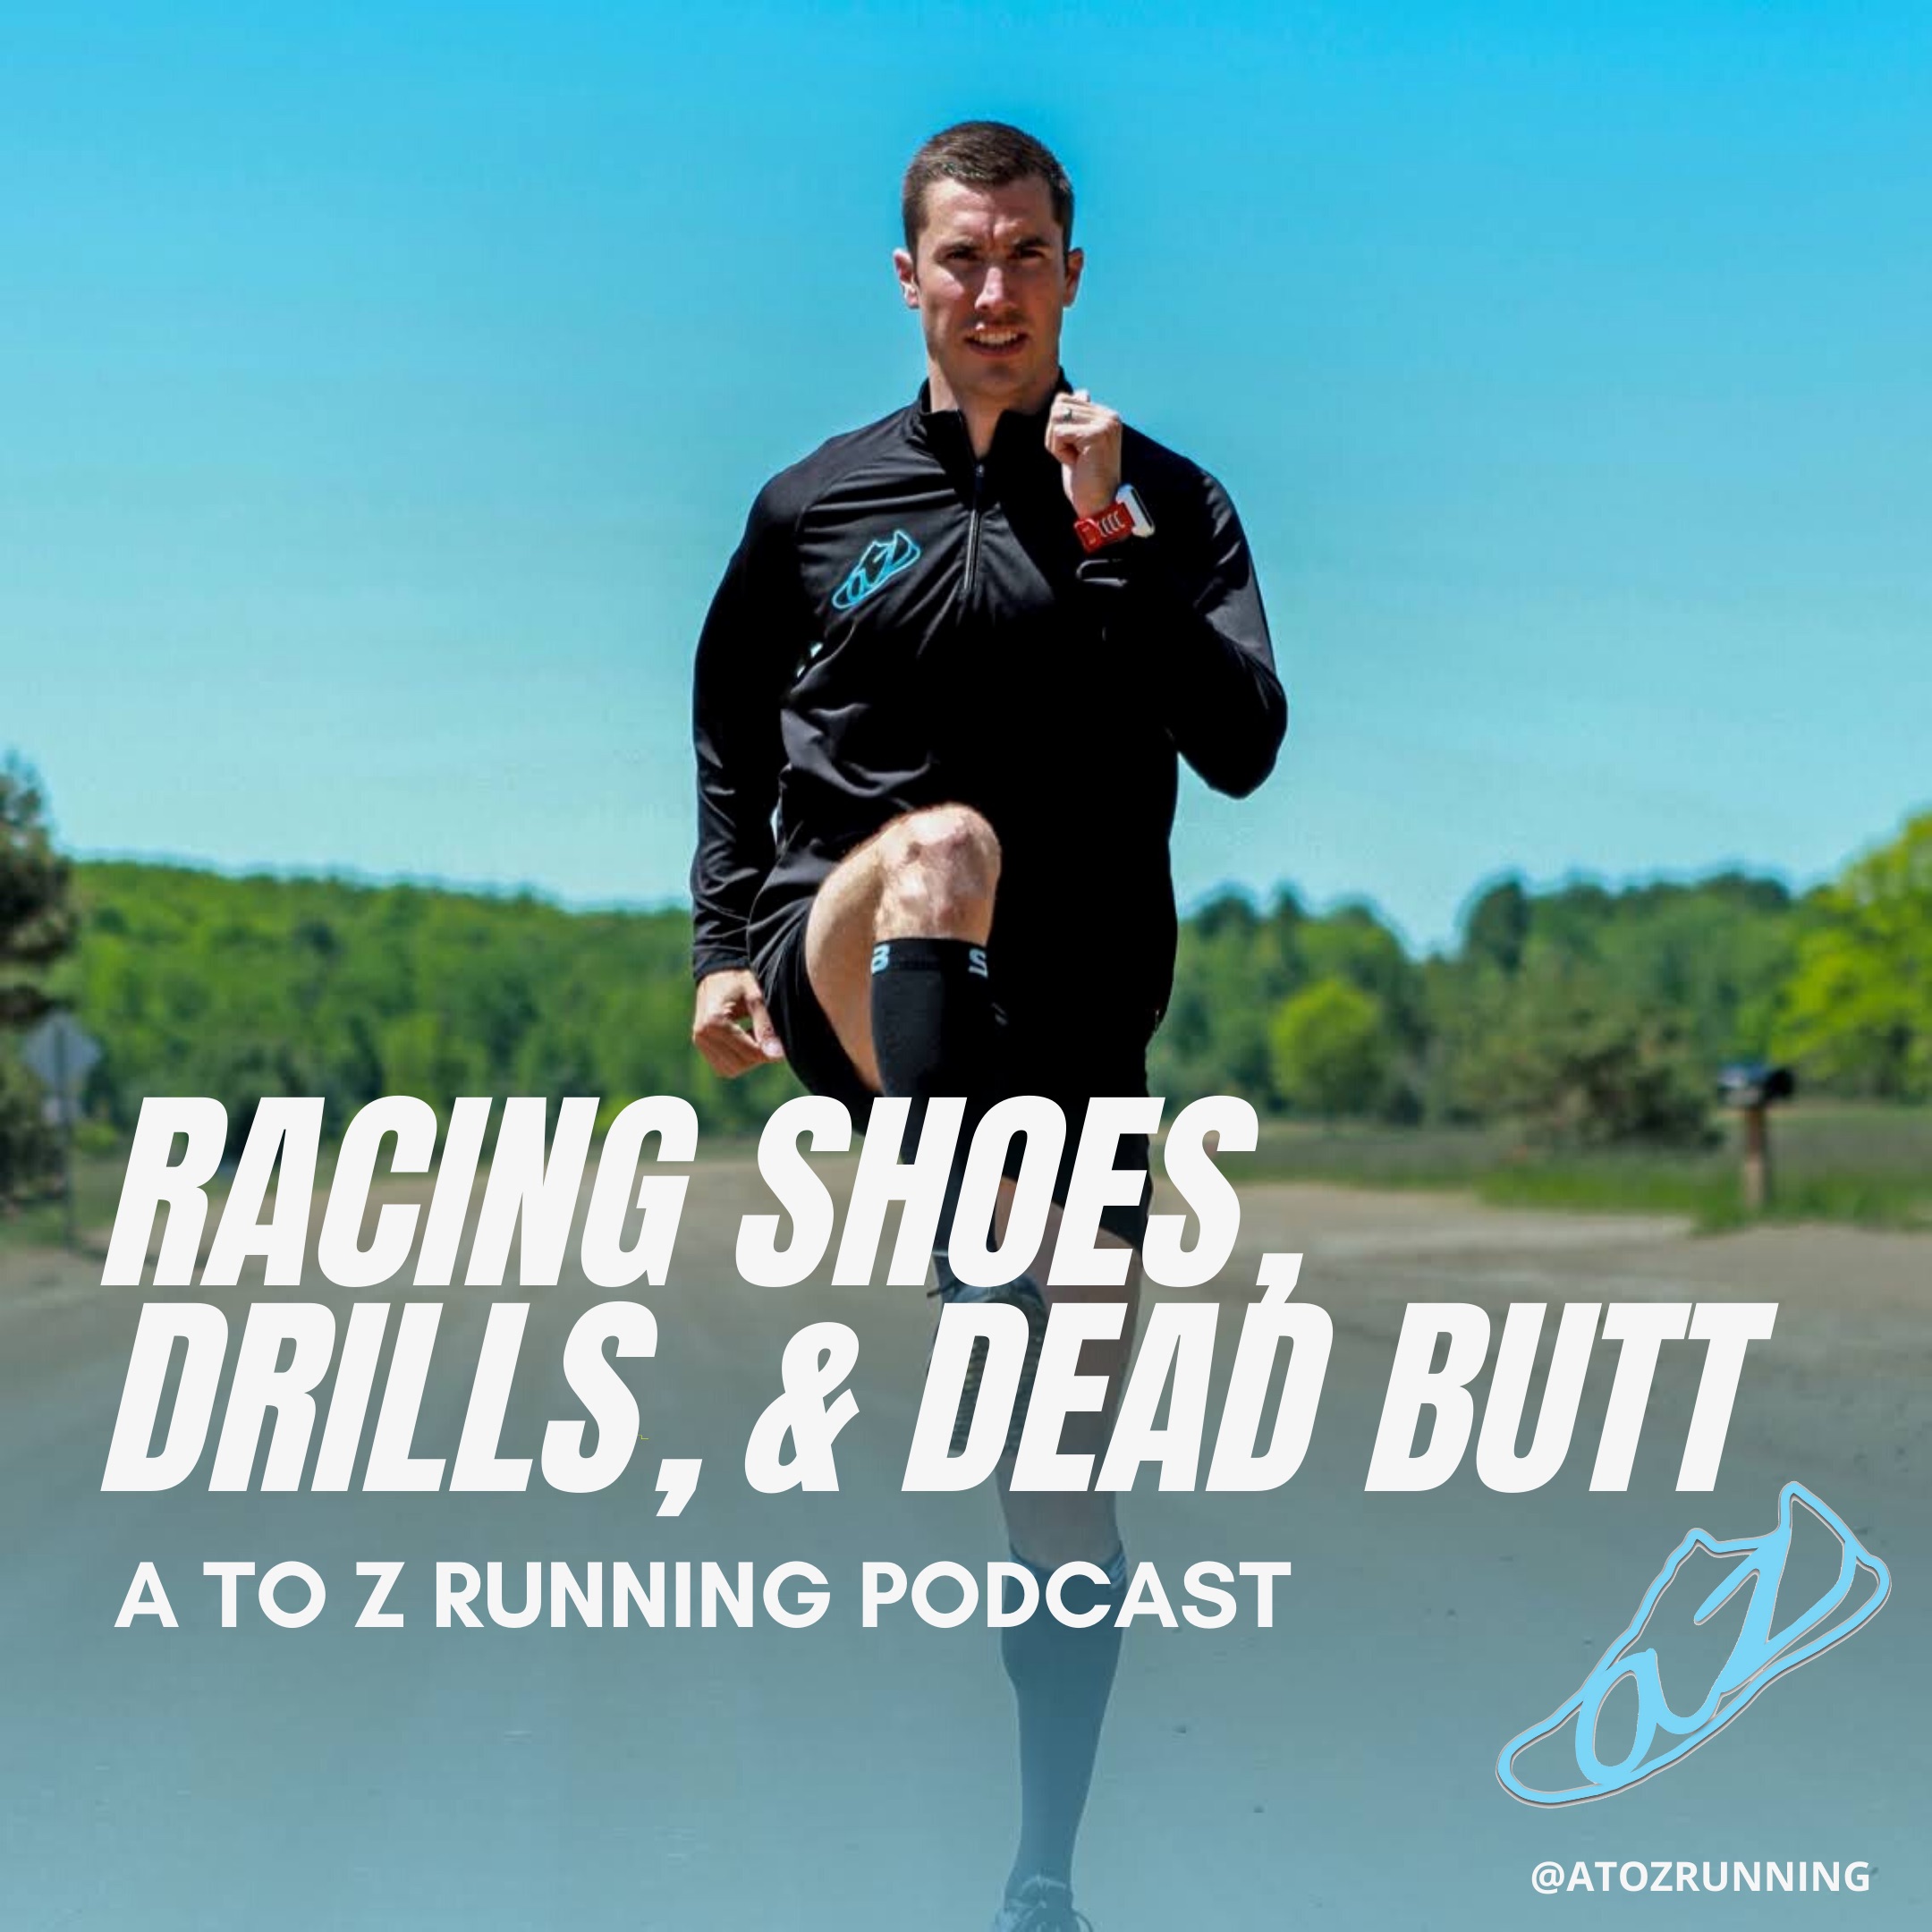 Racing shoes drills and dead butt with photo of man doing running drills on a dirt road in michigan